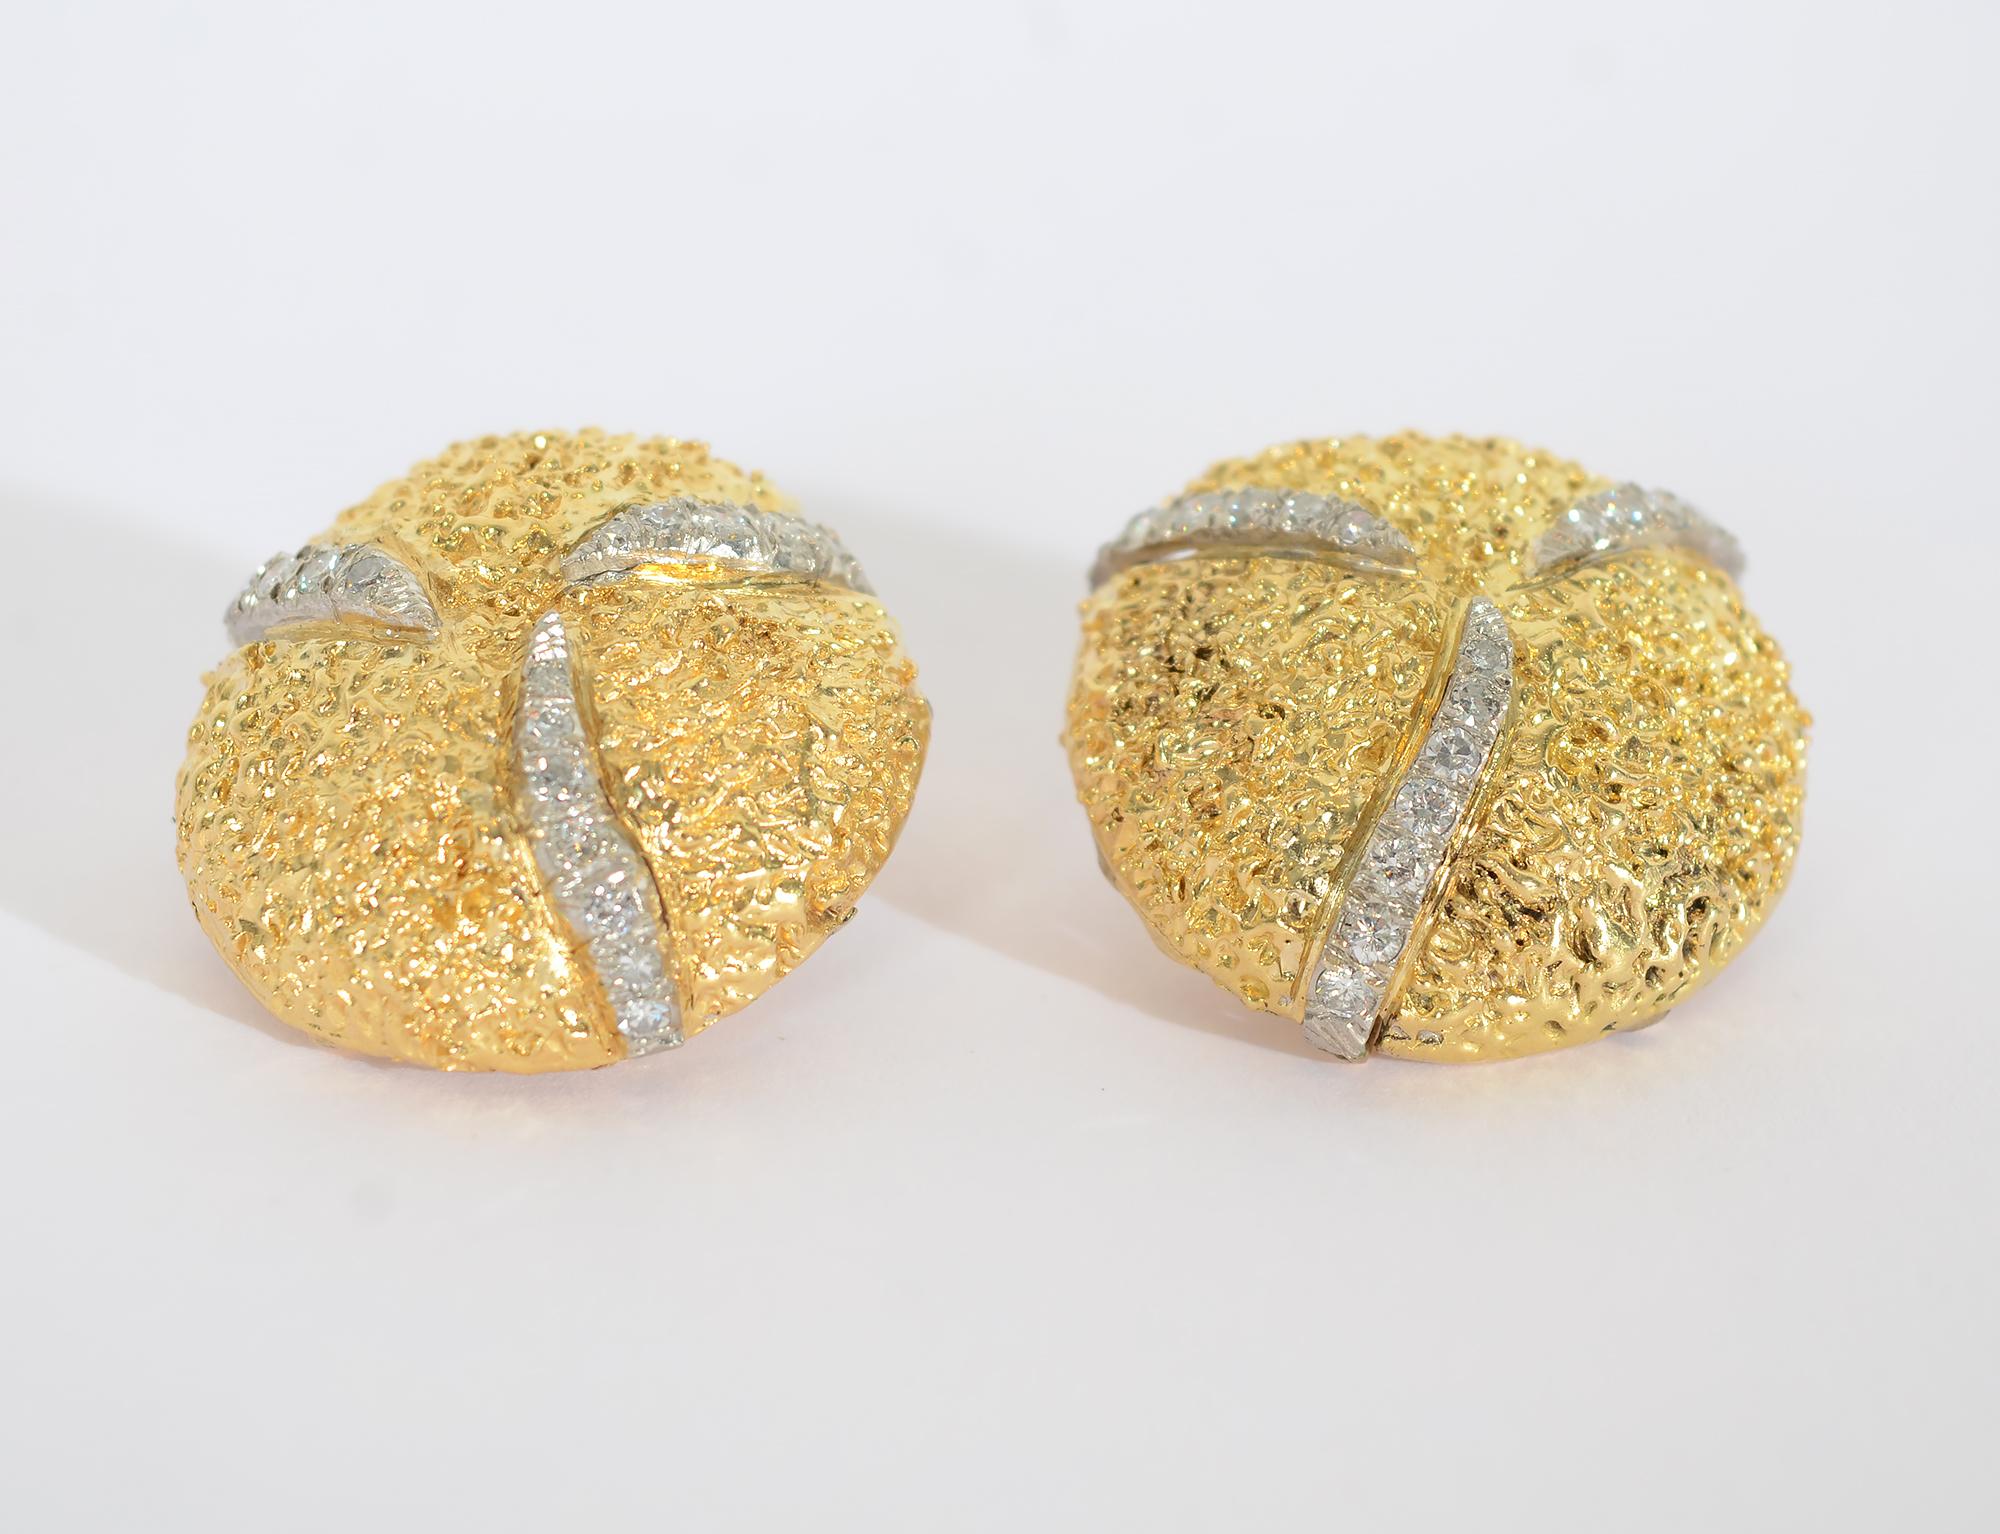 Wonderfully textured earrings by the late jewelry designer and sculptor, Boris Le Beau. LeBeau had a store on Madison Avenue for many years.
These earrings measure 1 inch in diameter. In addition to the finely sculpted texture, each earring has